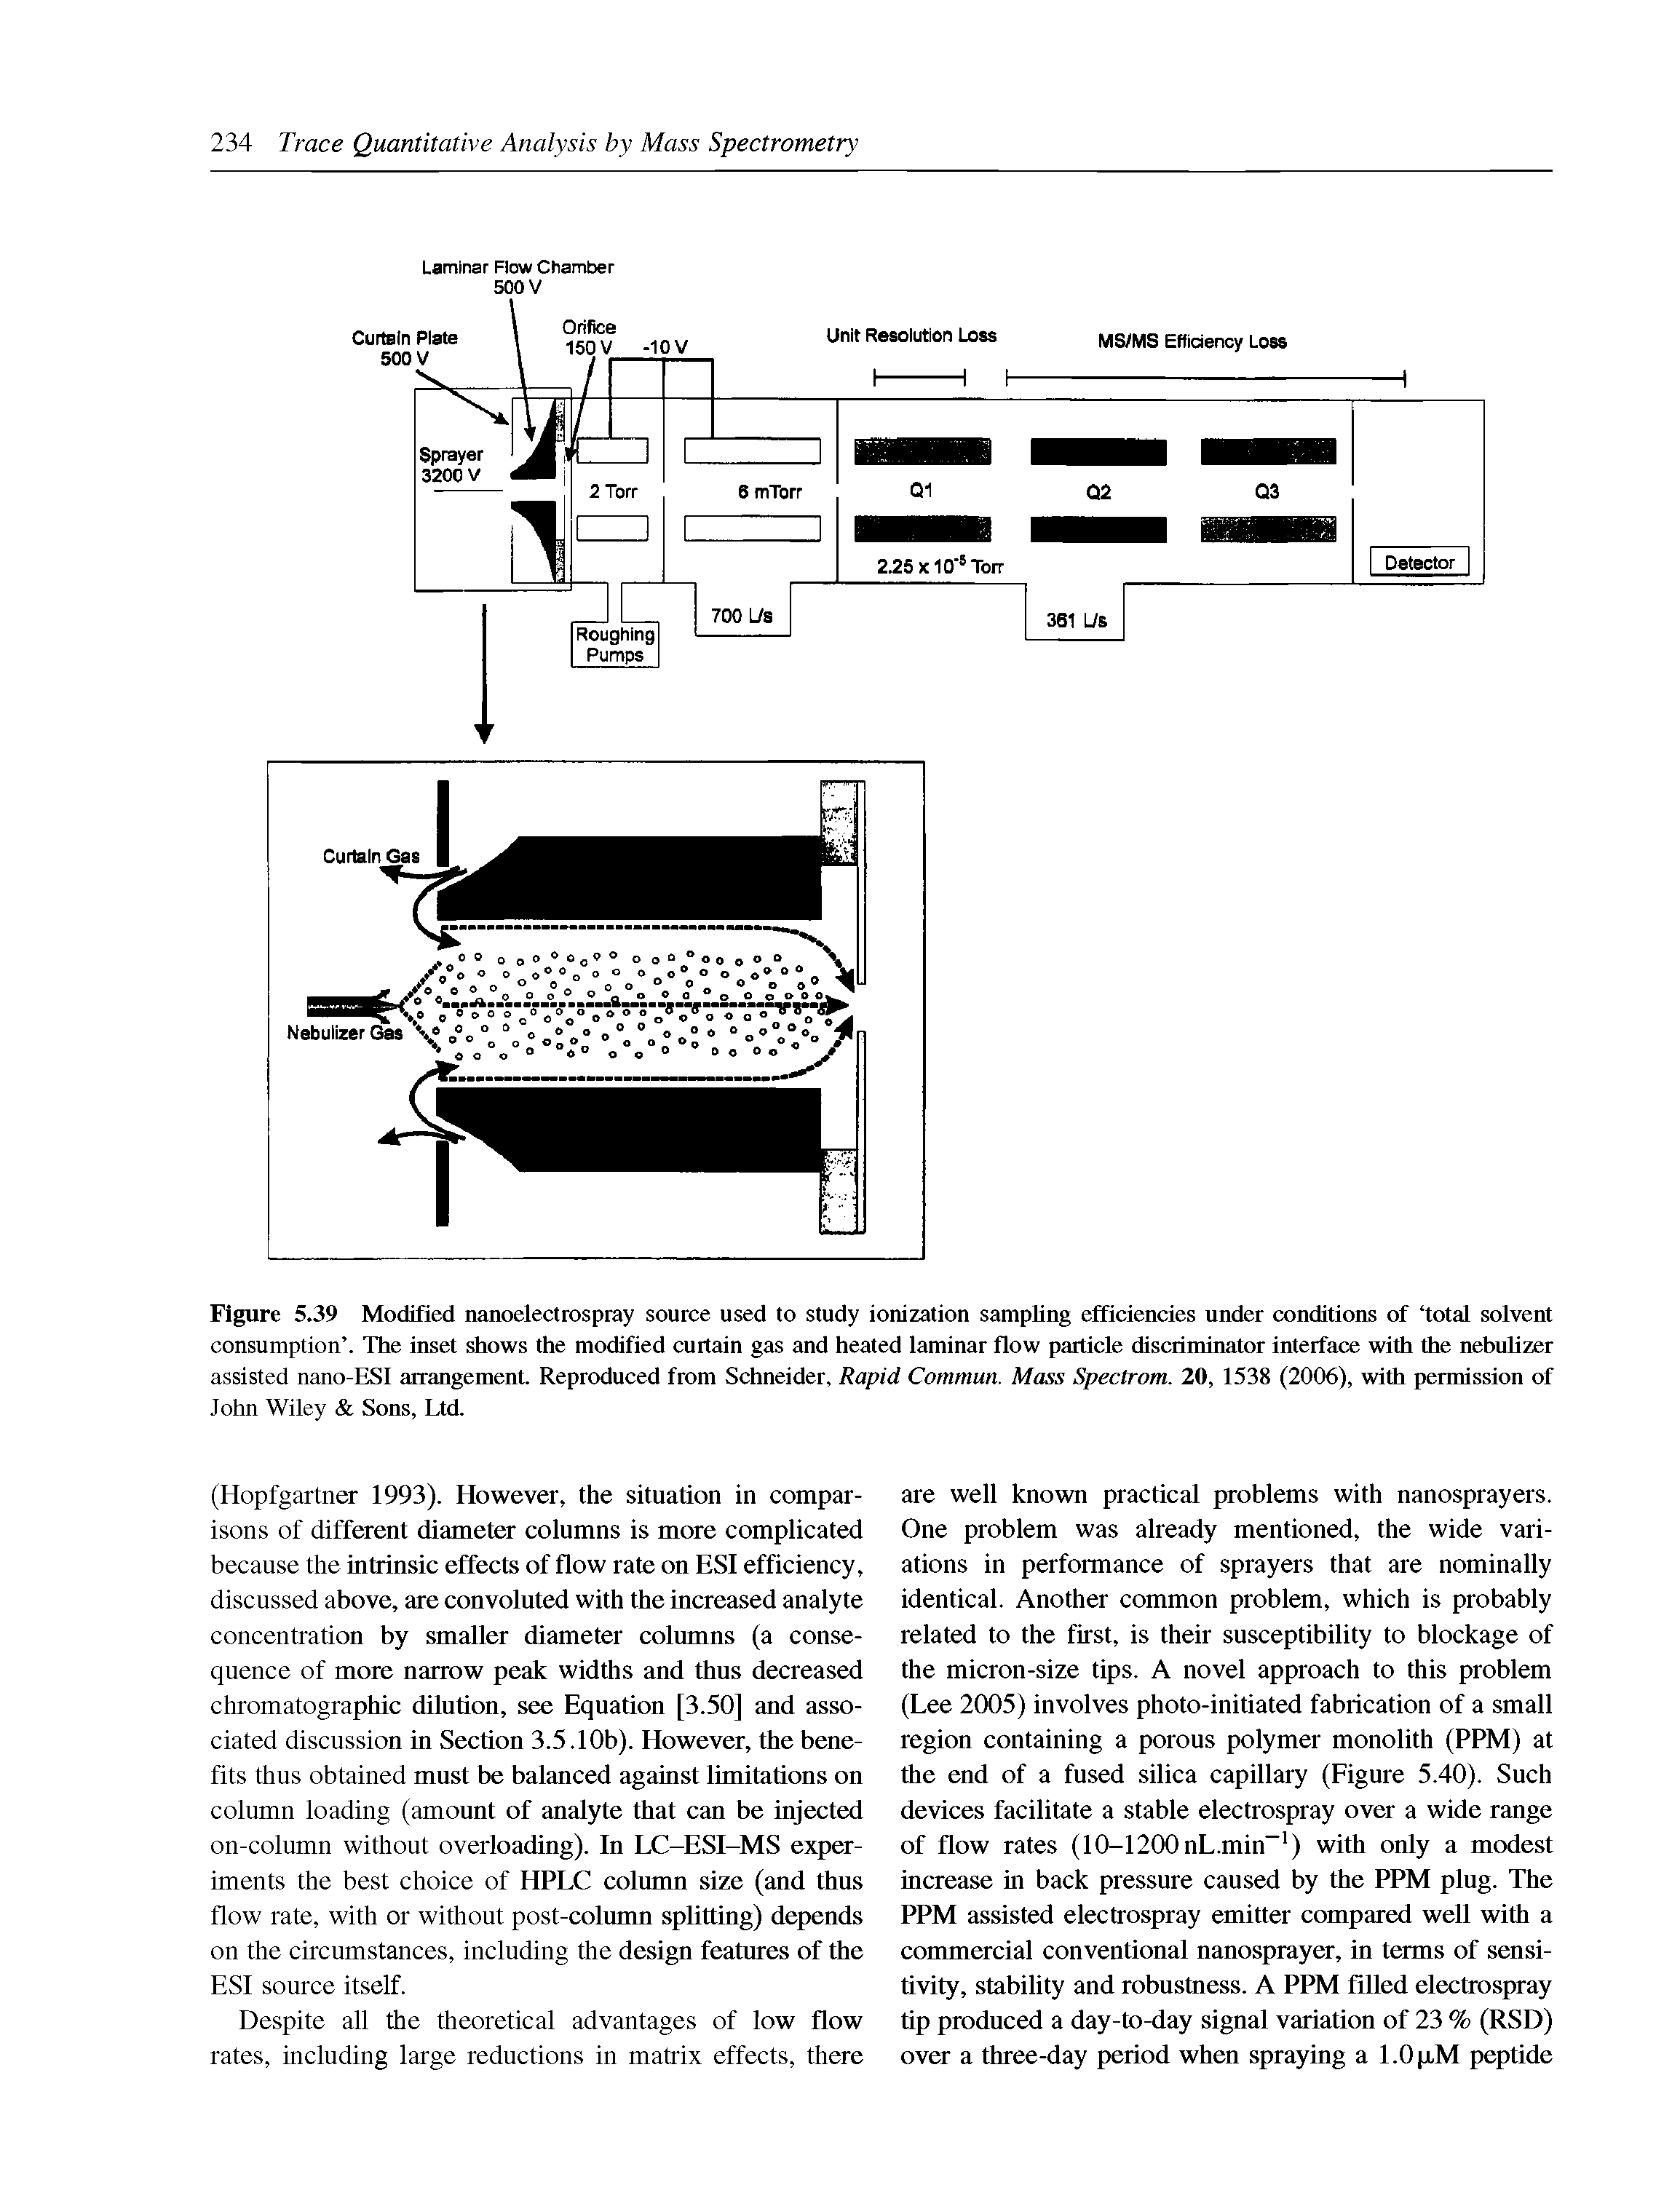 Figure 5.39 Modified nanoelectrospray source used to study ionization sampling efficiencies under conditions of total solvent consumption . The inset shows the modified curtain gas and heated laminar flow particle discriminator interface with the nebulizier assisted nano-ESl arrangement. Reproduced from Schneider, Rapid Commun. Mass Spectrom. 20, 1538 (2006), with permission of John Wiley Sons, Ltd.